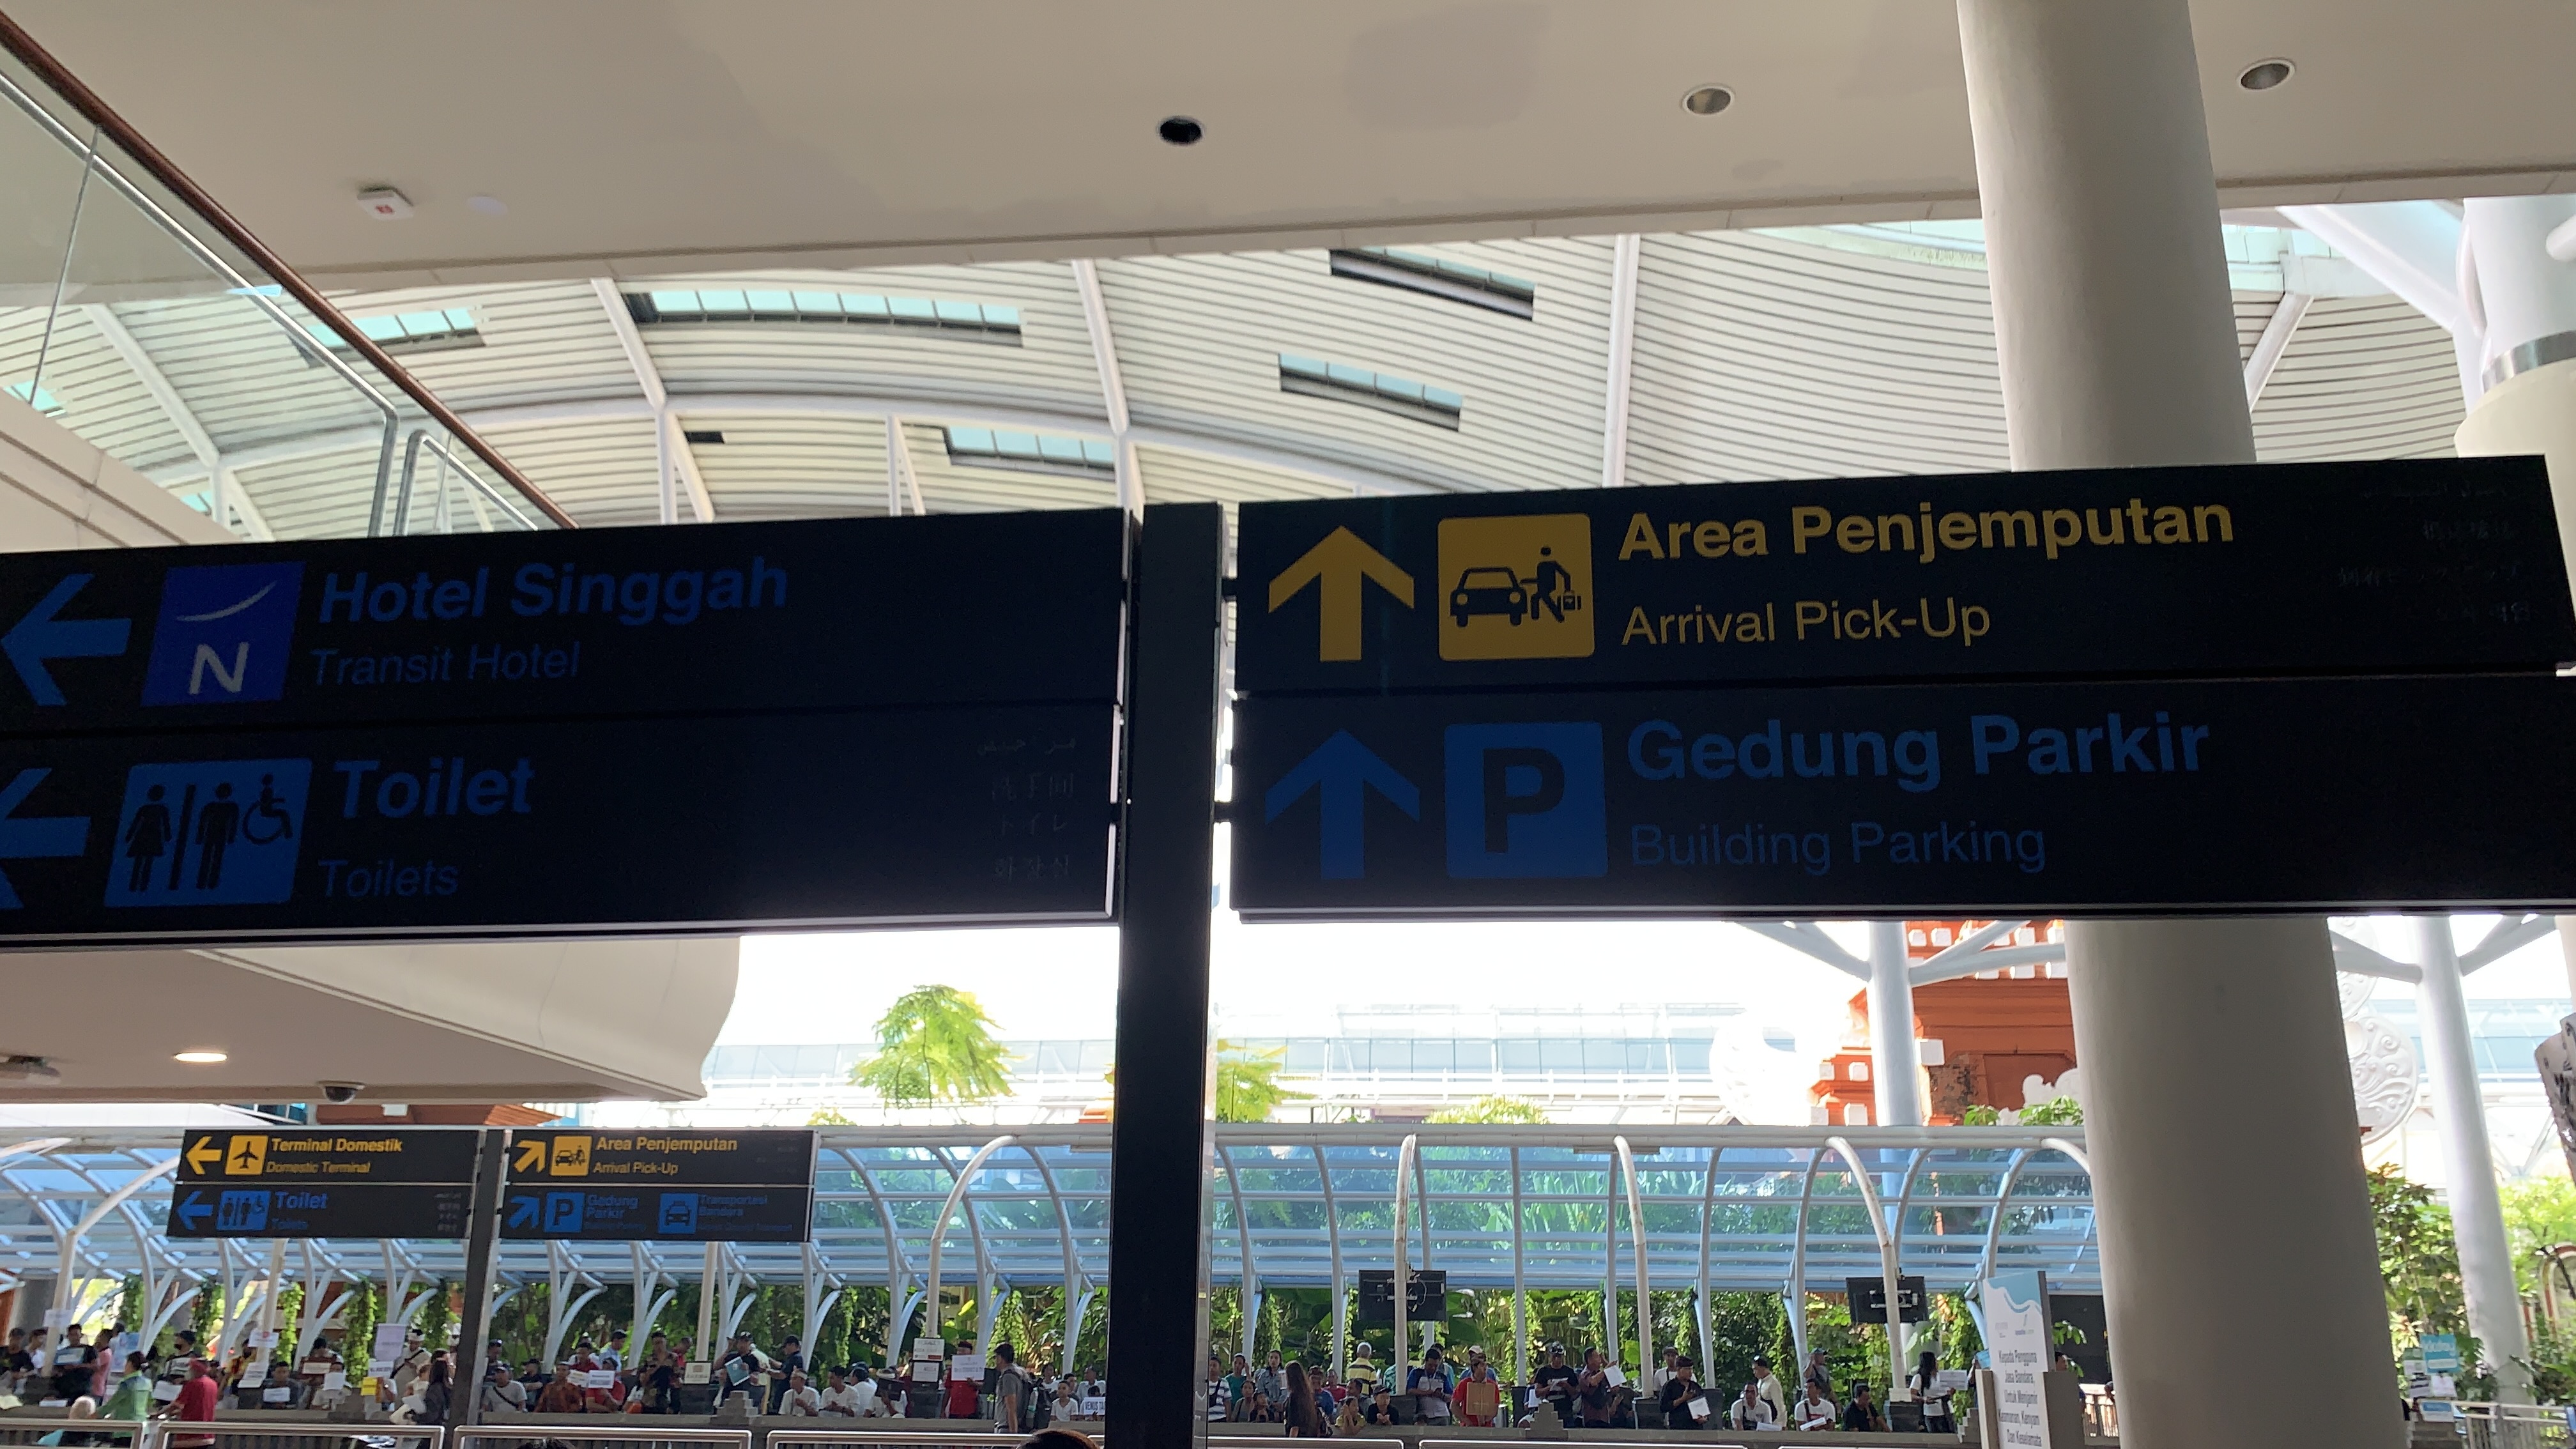 Airport signs directing to Arrival Pick-Up, Building Parking, Transit Hotel, and Toilets at Bali's Ngurah Rai International Airport